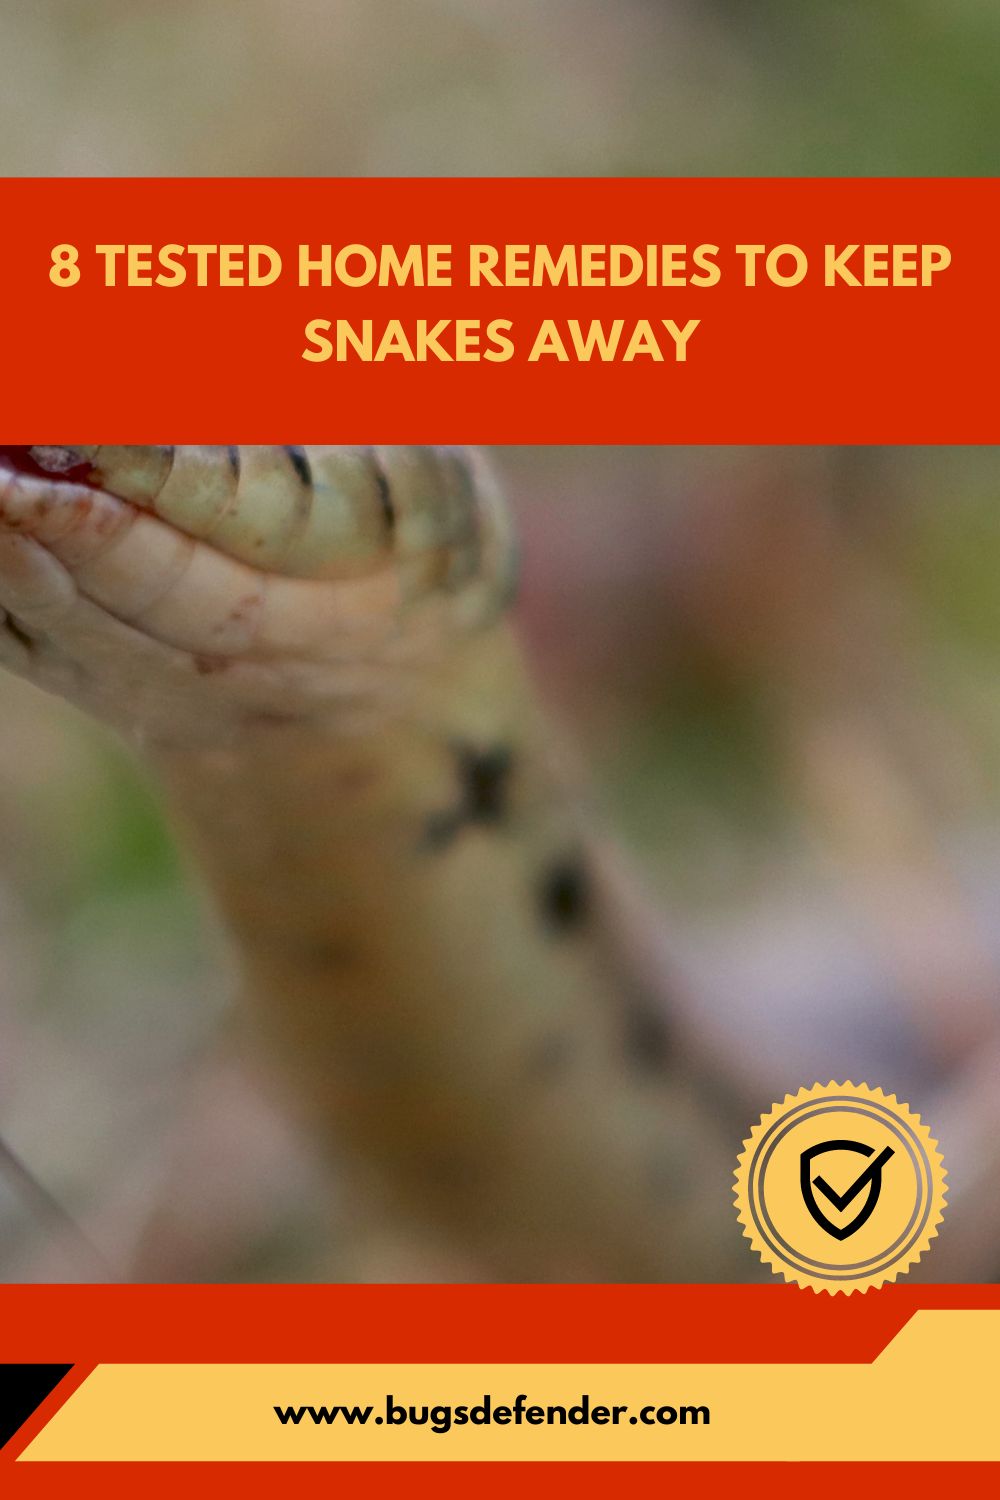 8 Tested Home Remedies To Keep Snakes Away pin1